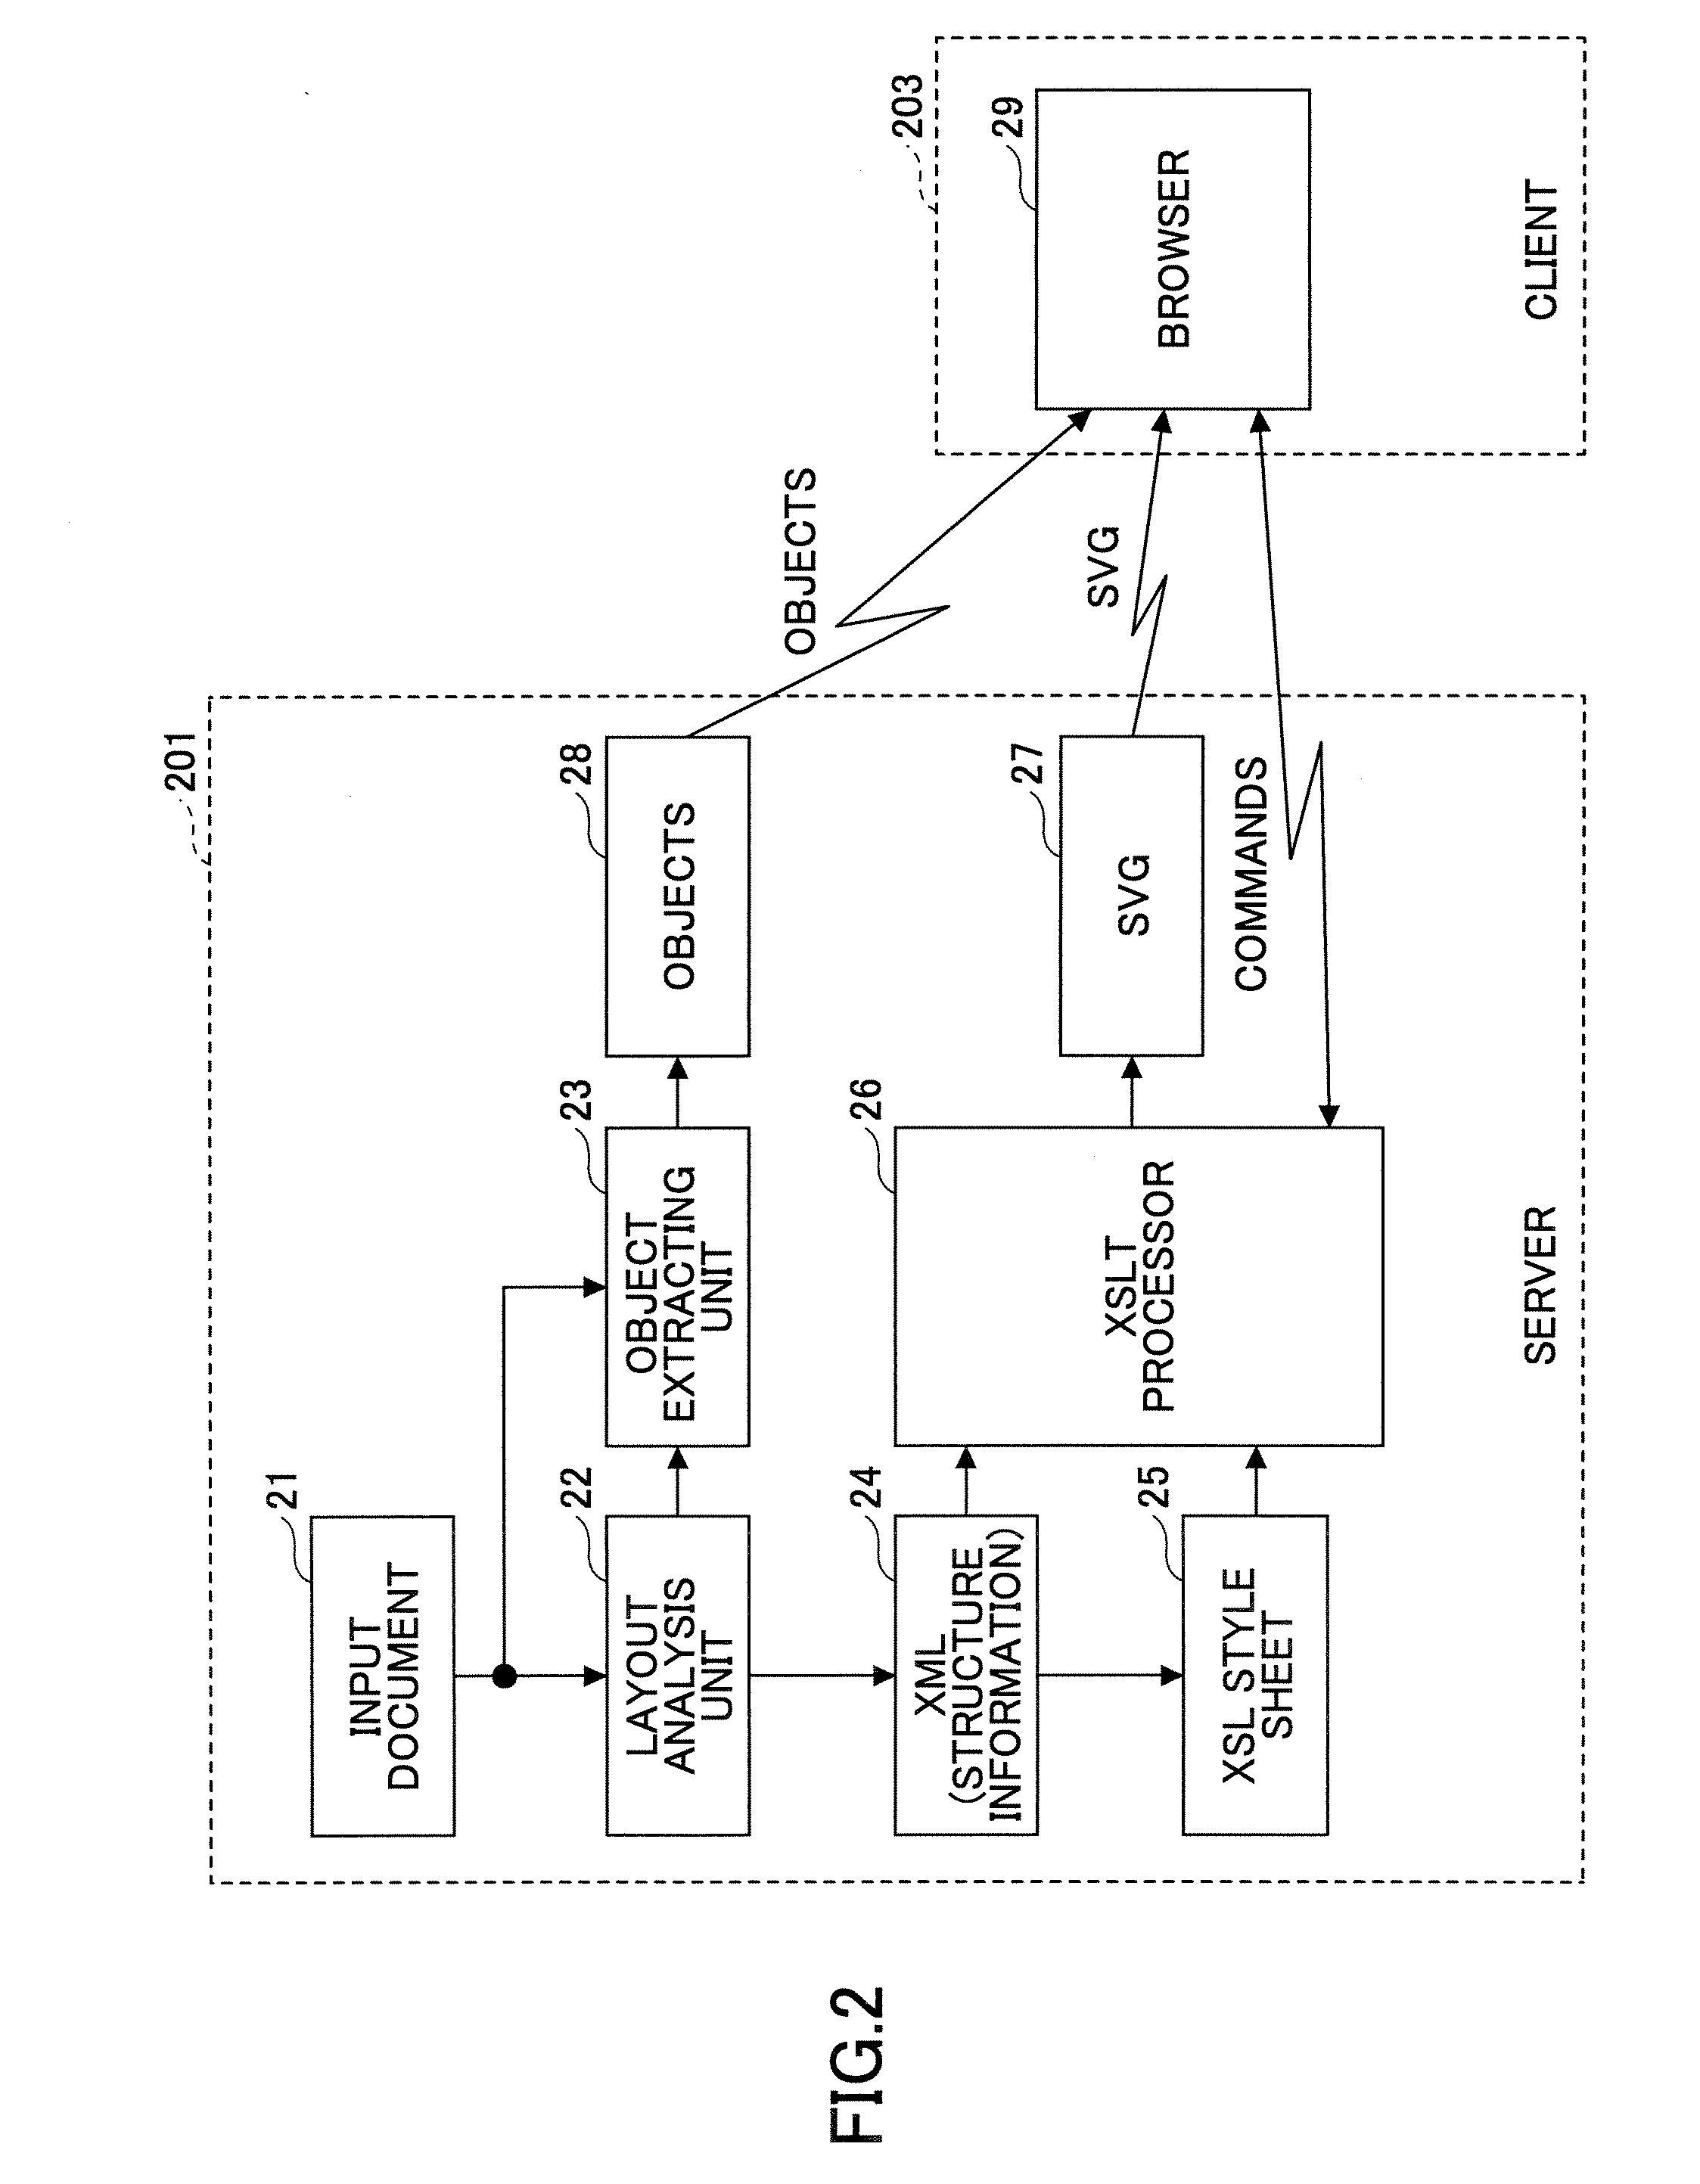 Document processing apparatus and method